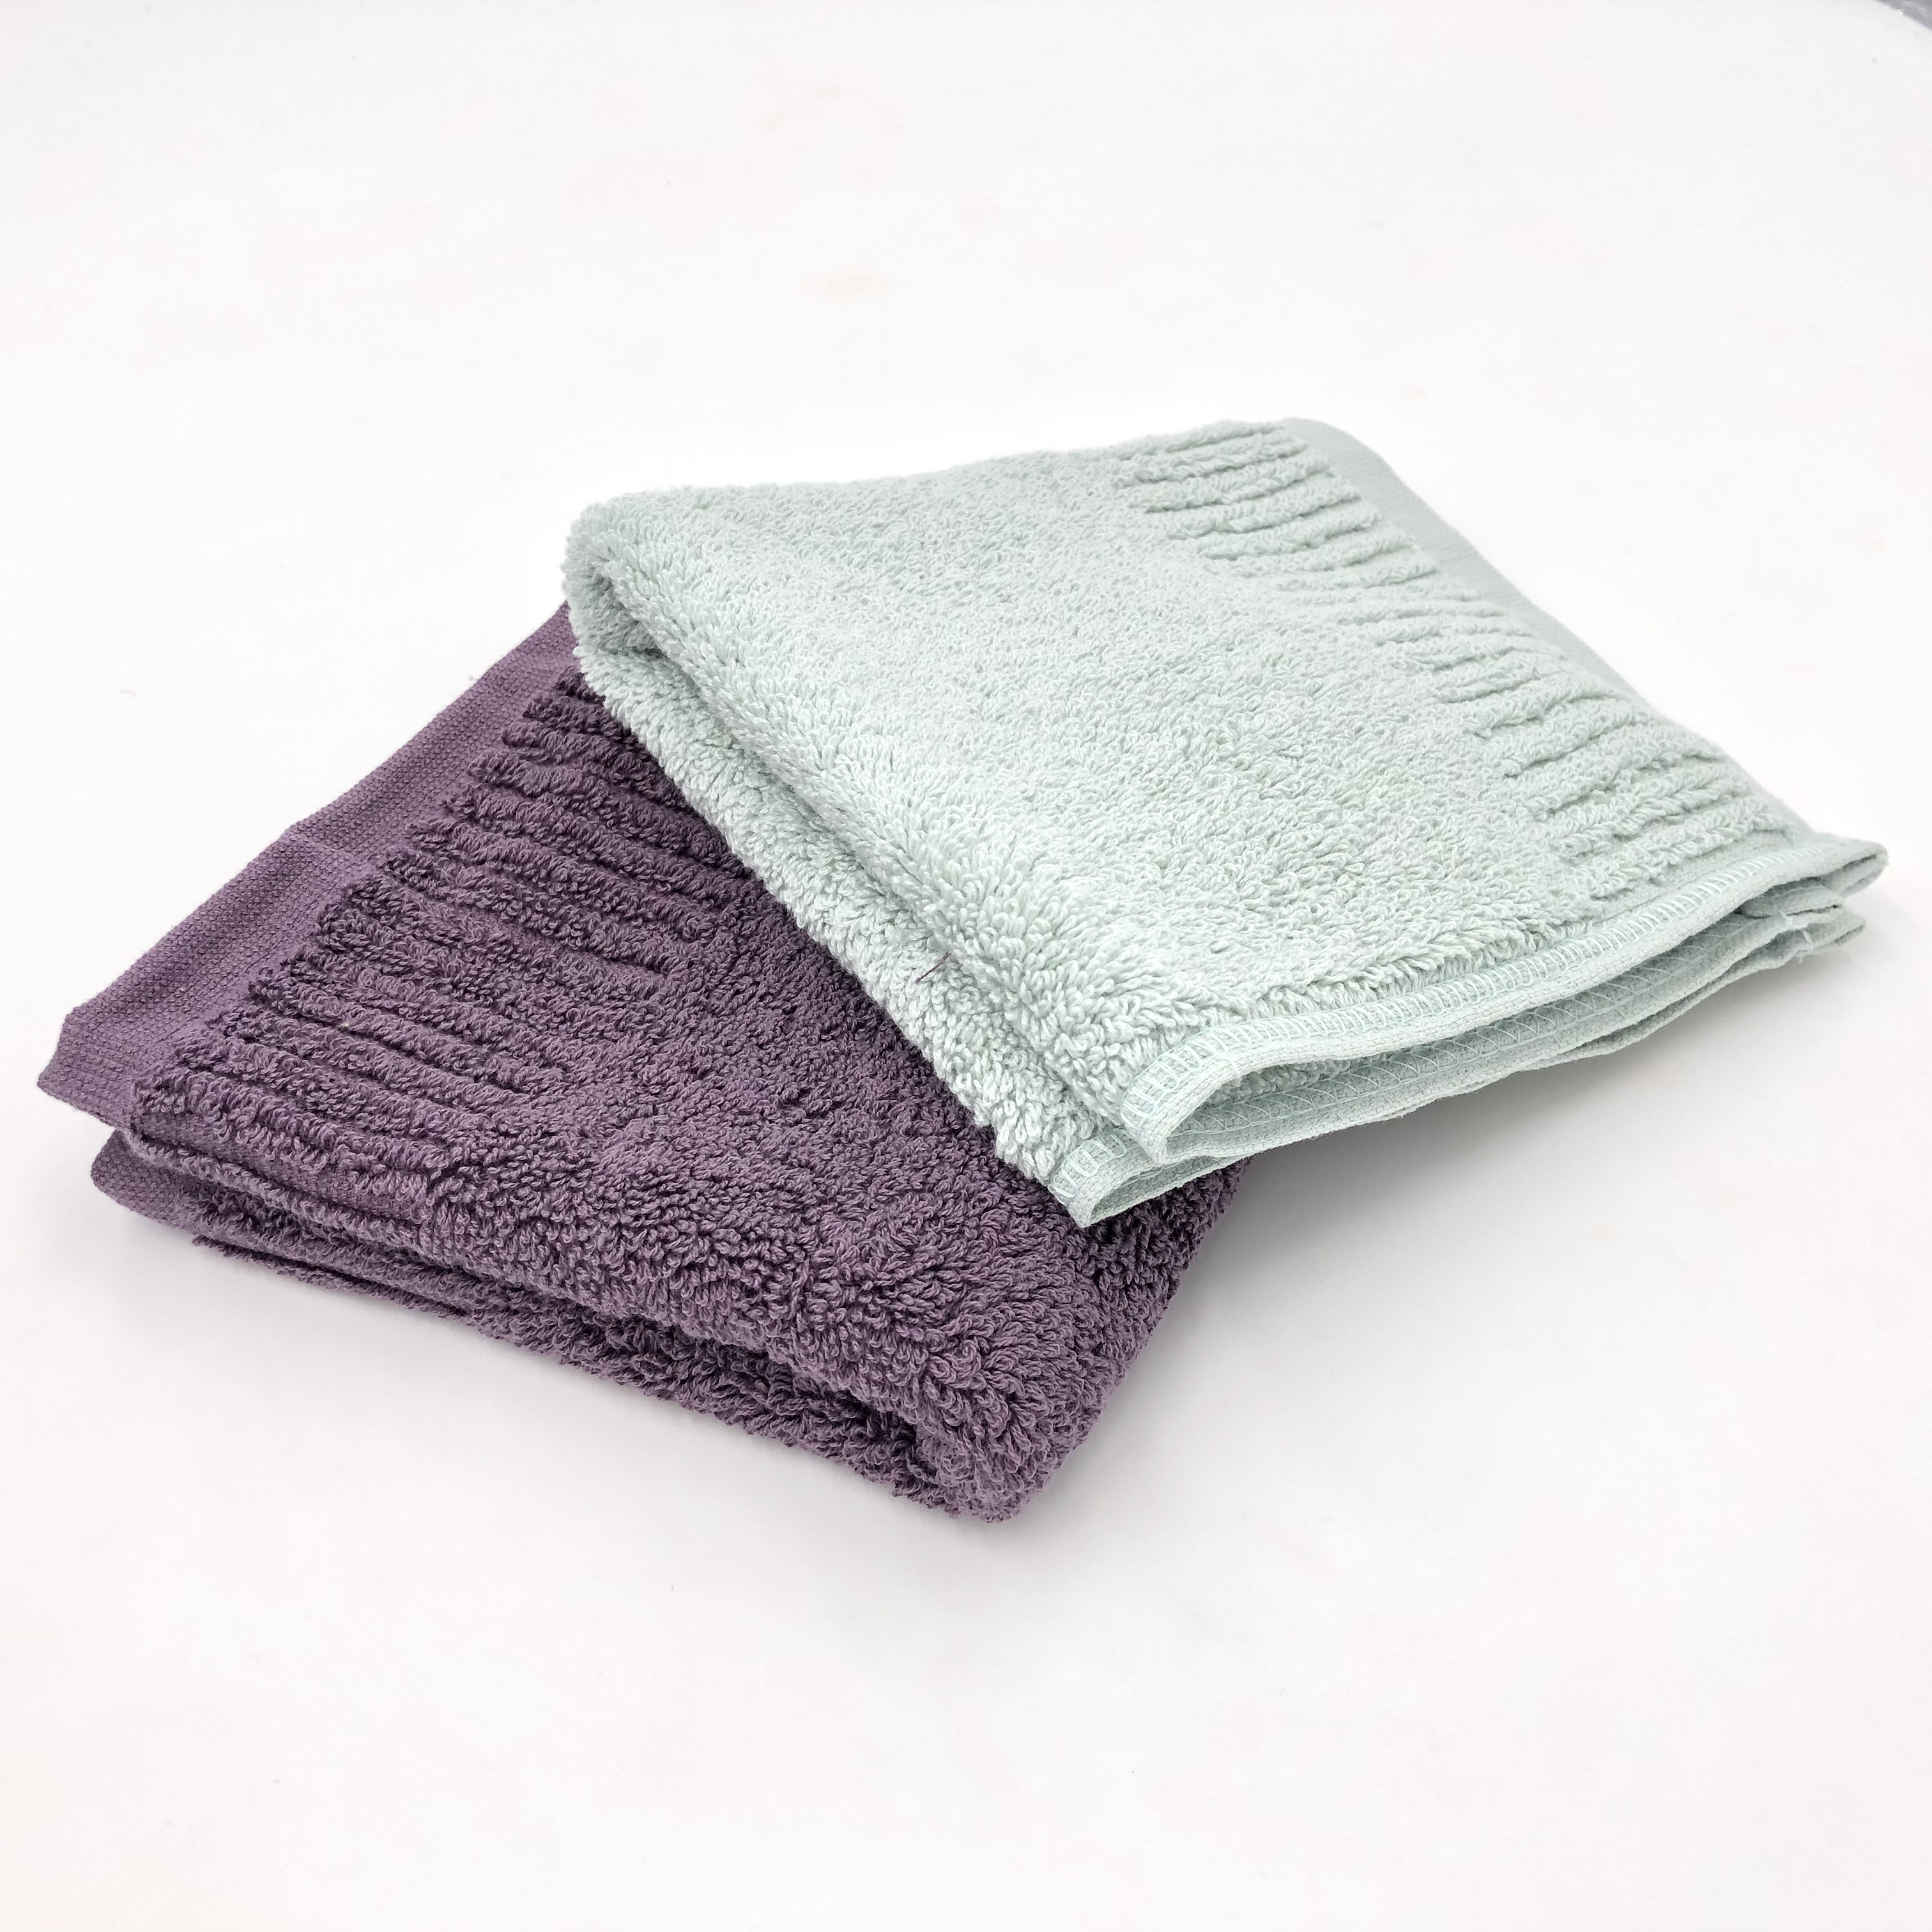 2021 TOP high qualtity 100% cotton towel for hotel